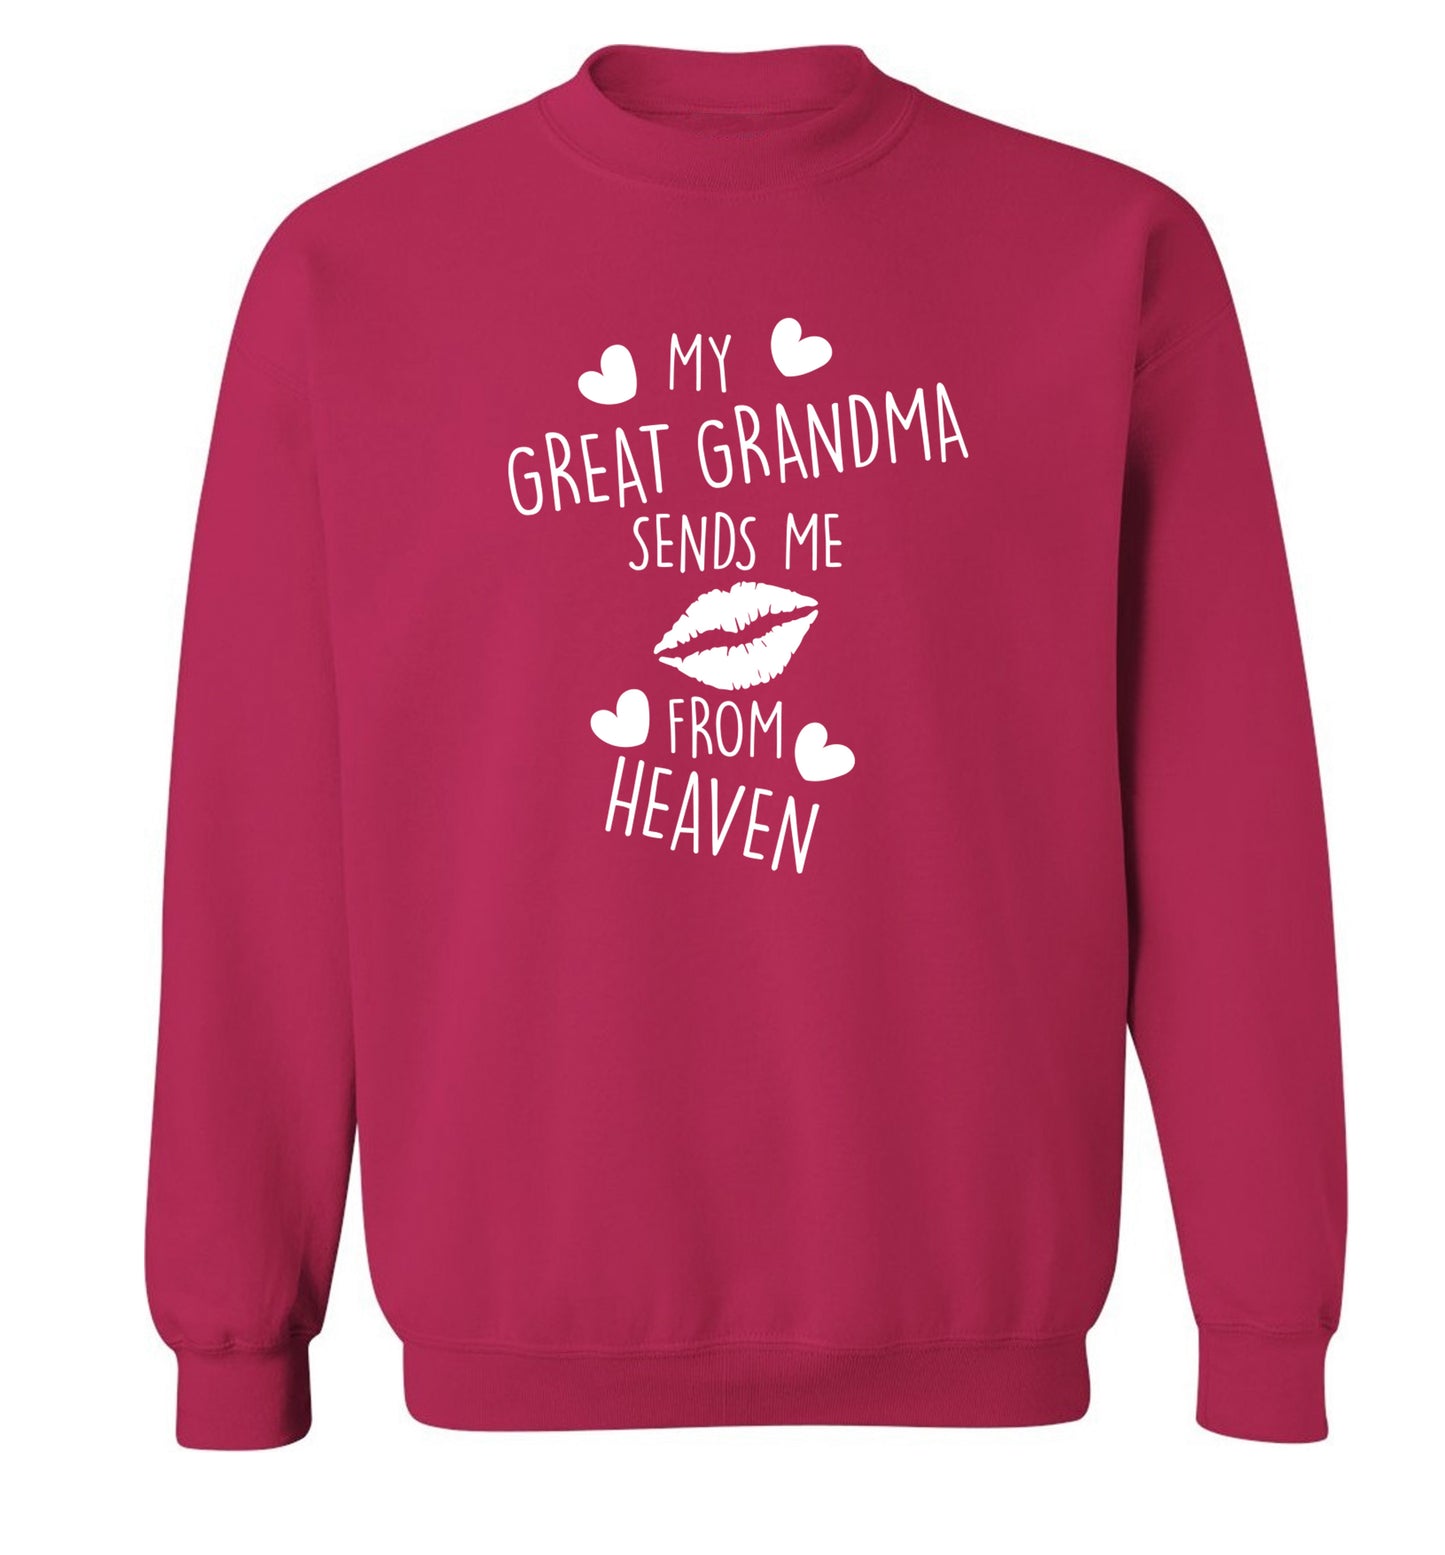 My great grandma sends me kisses from heaven Adult's unisex pink Sweater 2XL